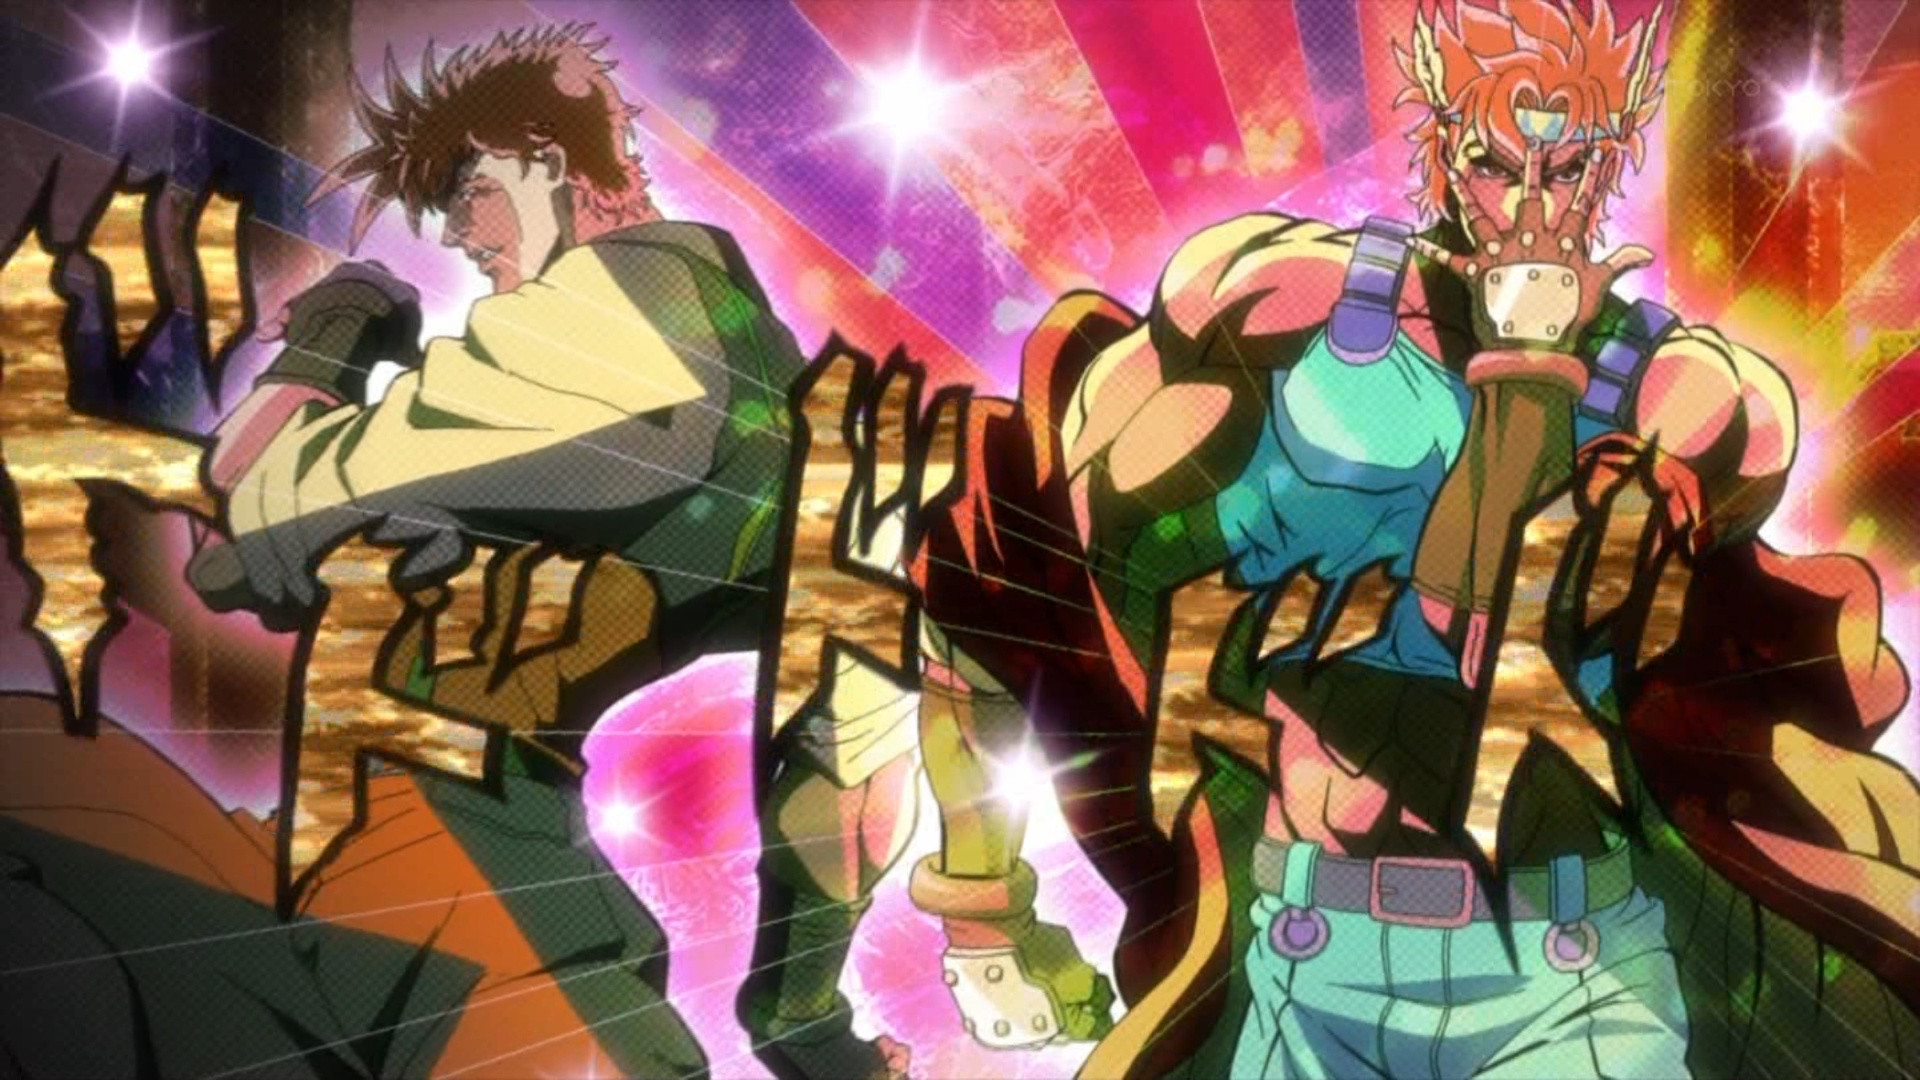 Is it possible to do all those fabulous poses depicted in JoJo's